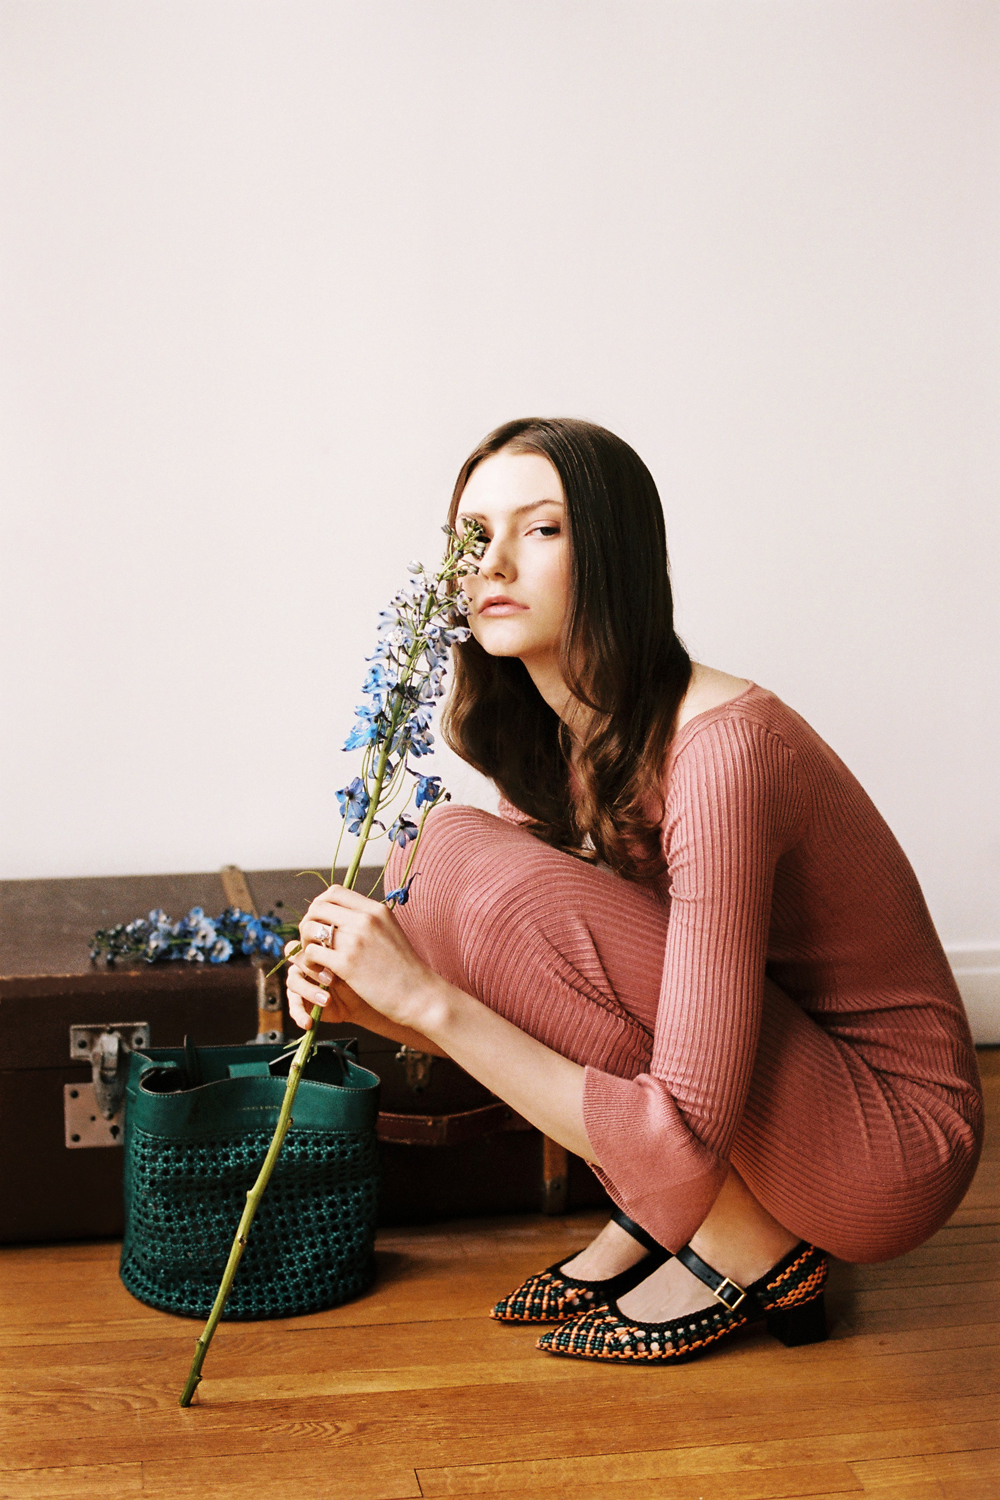 The Idea of Normalcy with Allyson Chalmers for CHARLES & KEITH